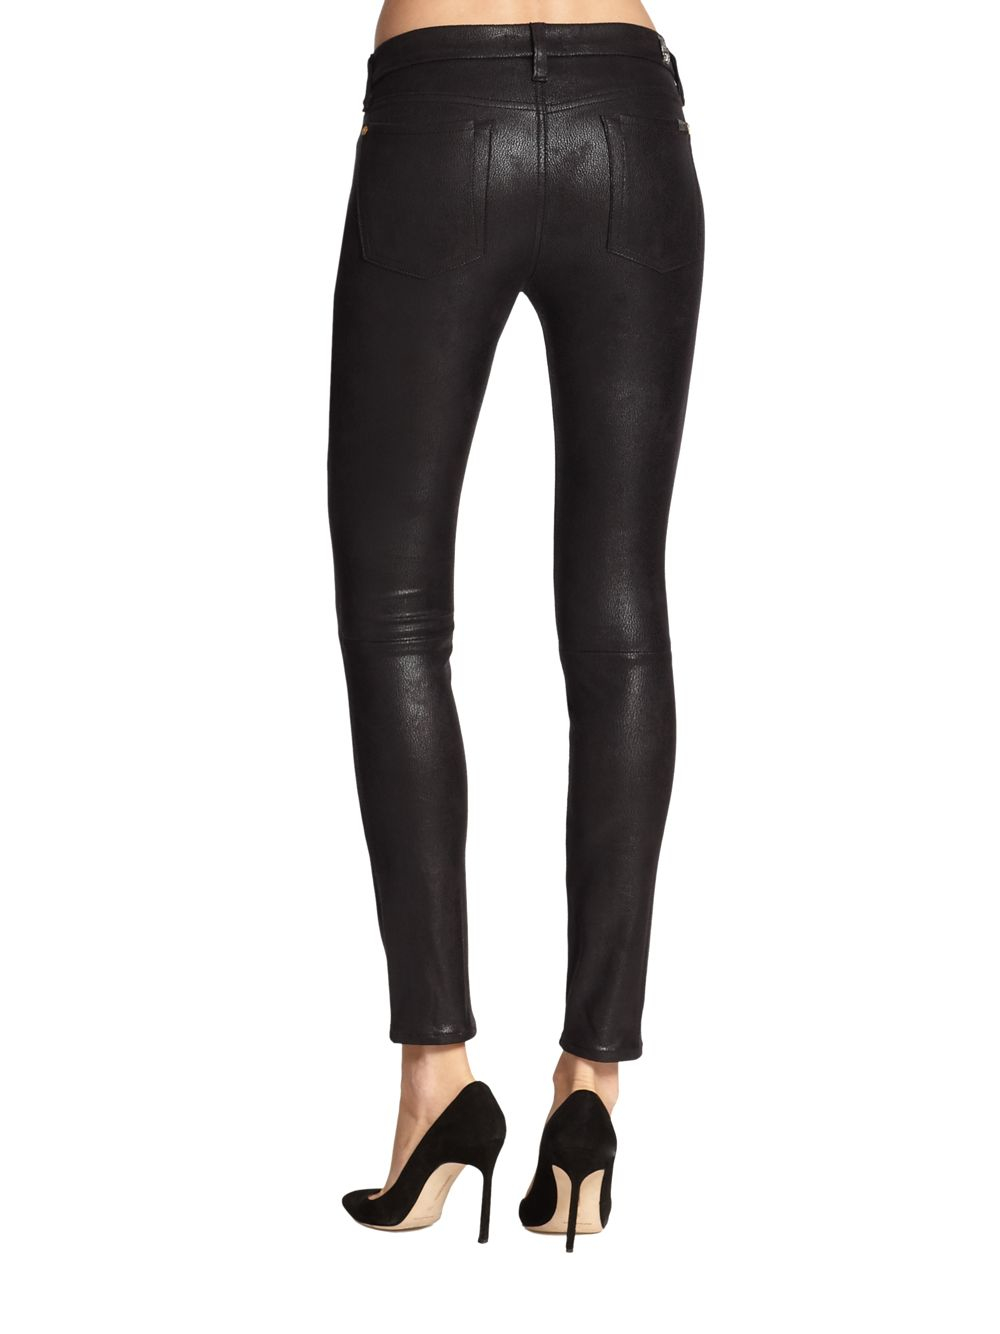 7 For All Mankind Crackle Leather-look Coated Skinny Jeans in Black - Lyst